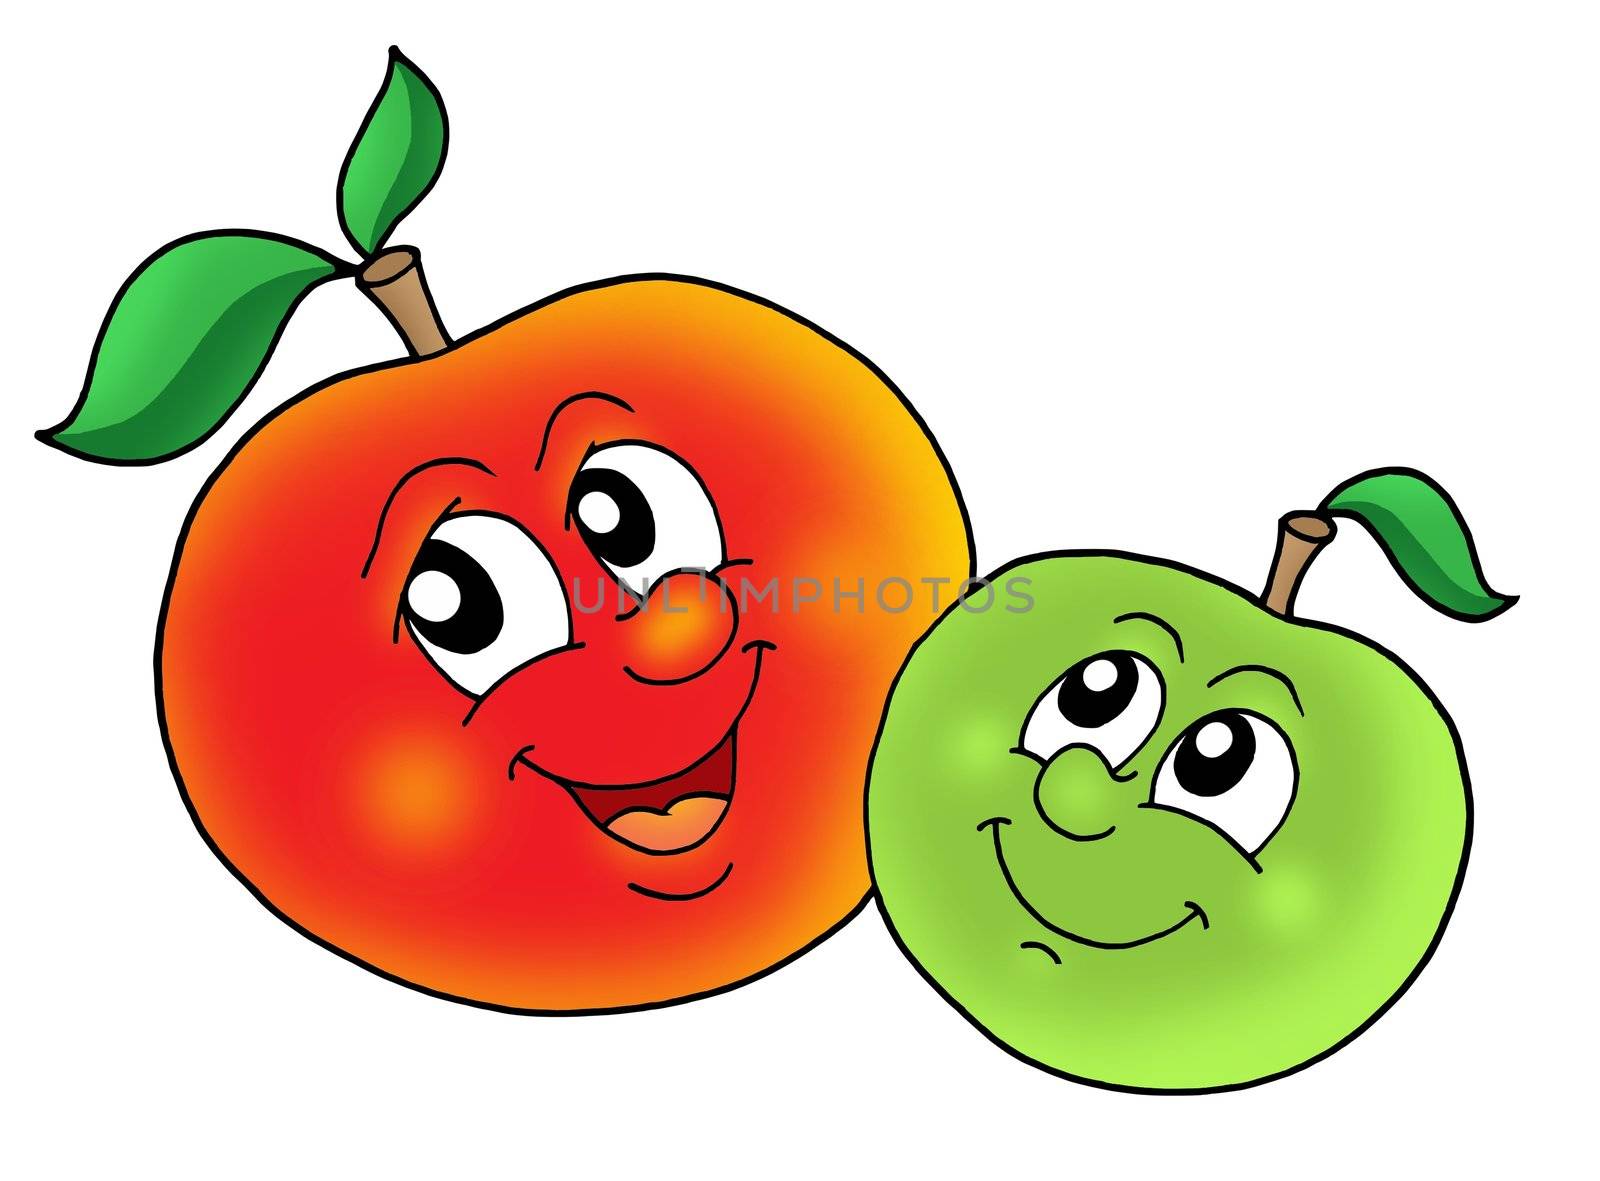 Pair of smiling apples by clairev